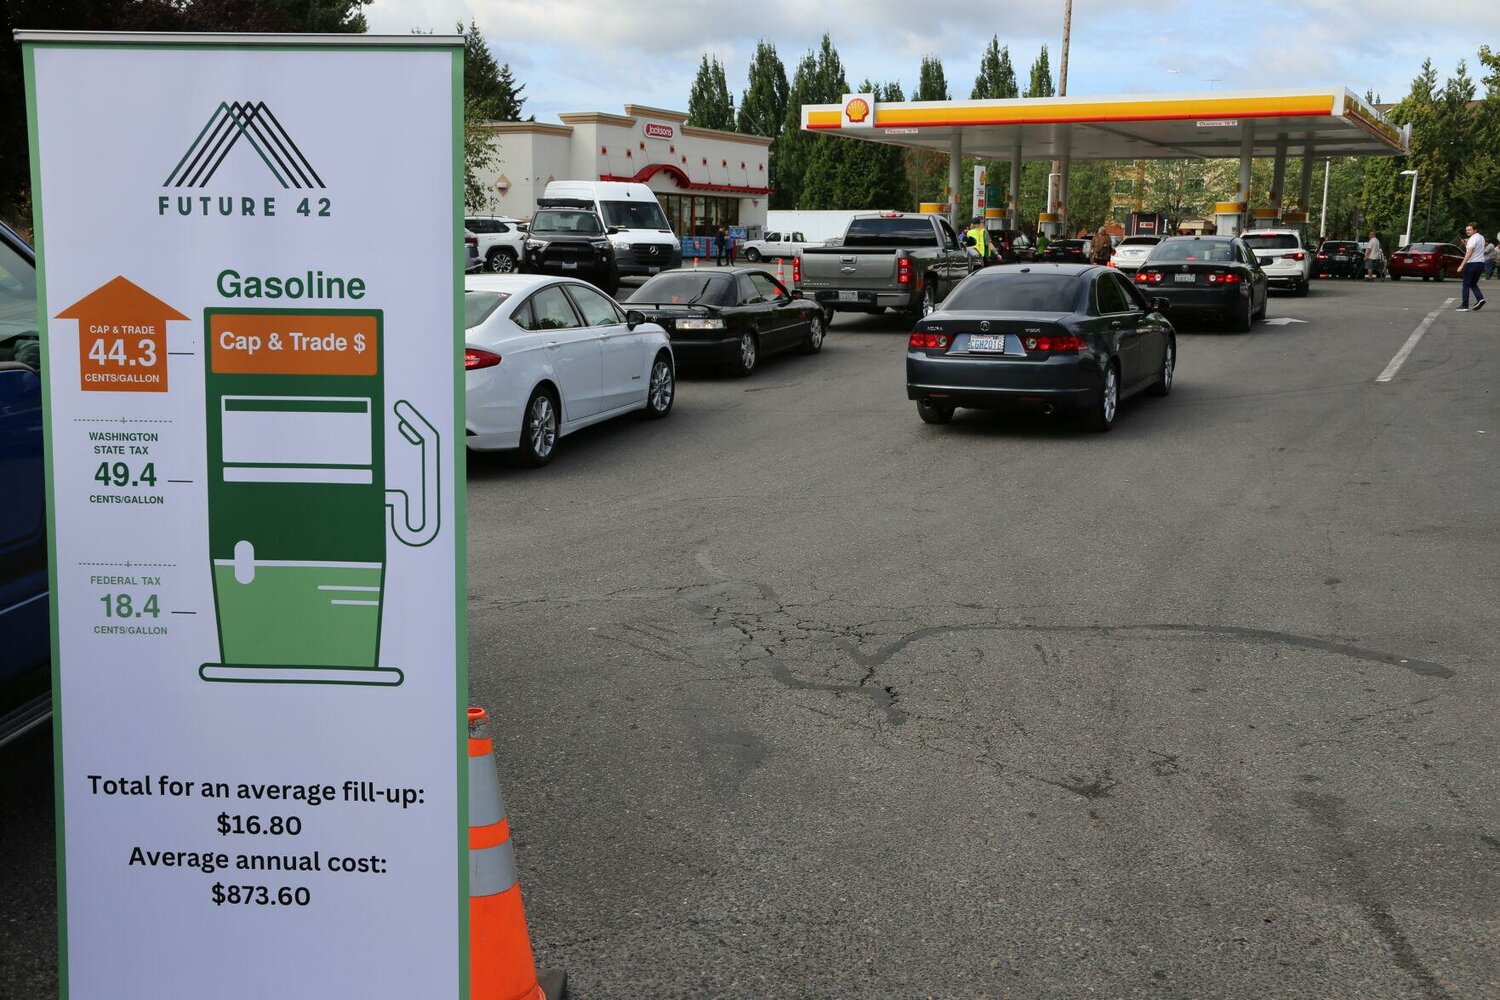 Hundreds of vehicles waiting in line for a gas tax holiday event in Kent, Washington. The event, which reduced gas prices to $3.82 per gallon was sponsored by Future 42 and the Washington state chapter of Americans For Prosperity.